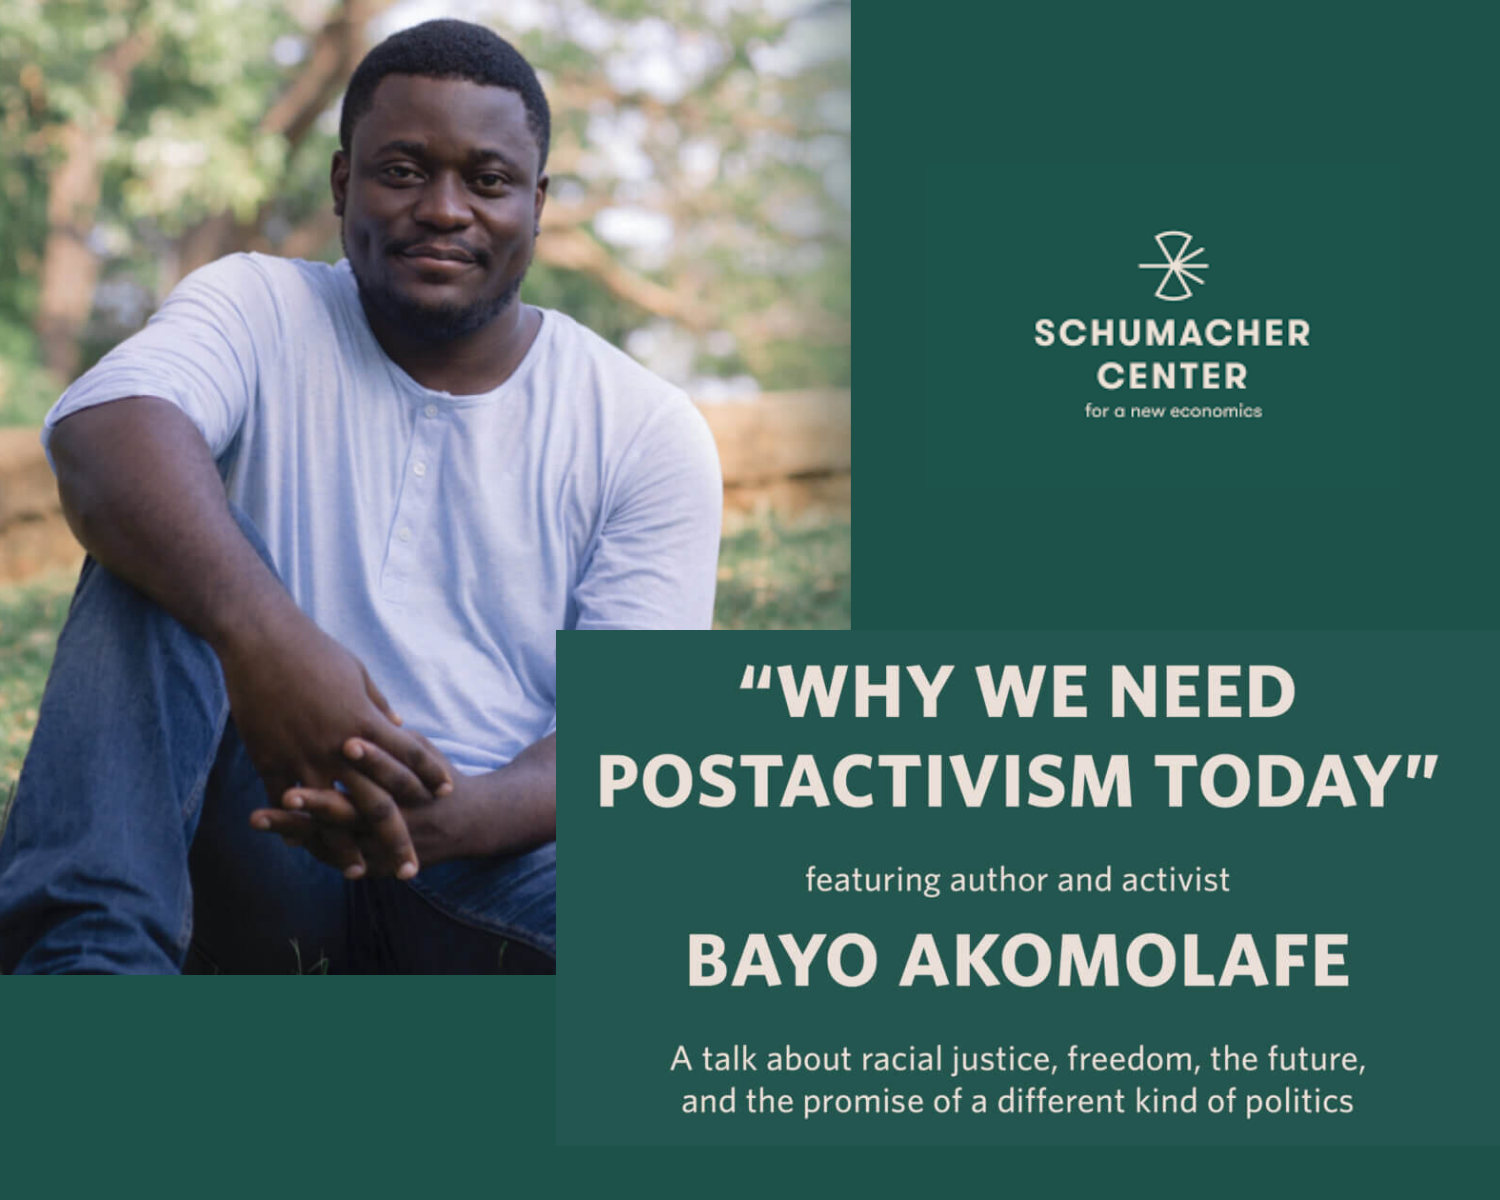 Shumacher Center Presents Why We Need Postactivism Today